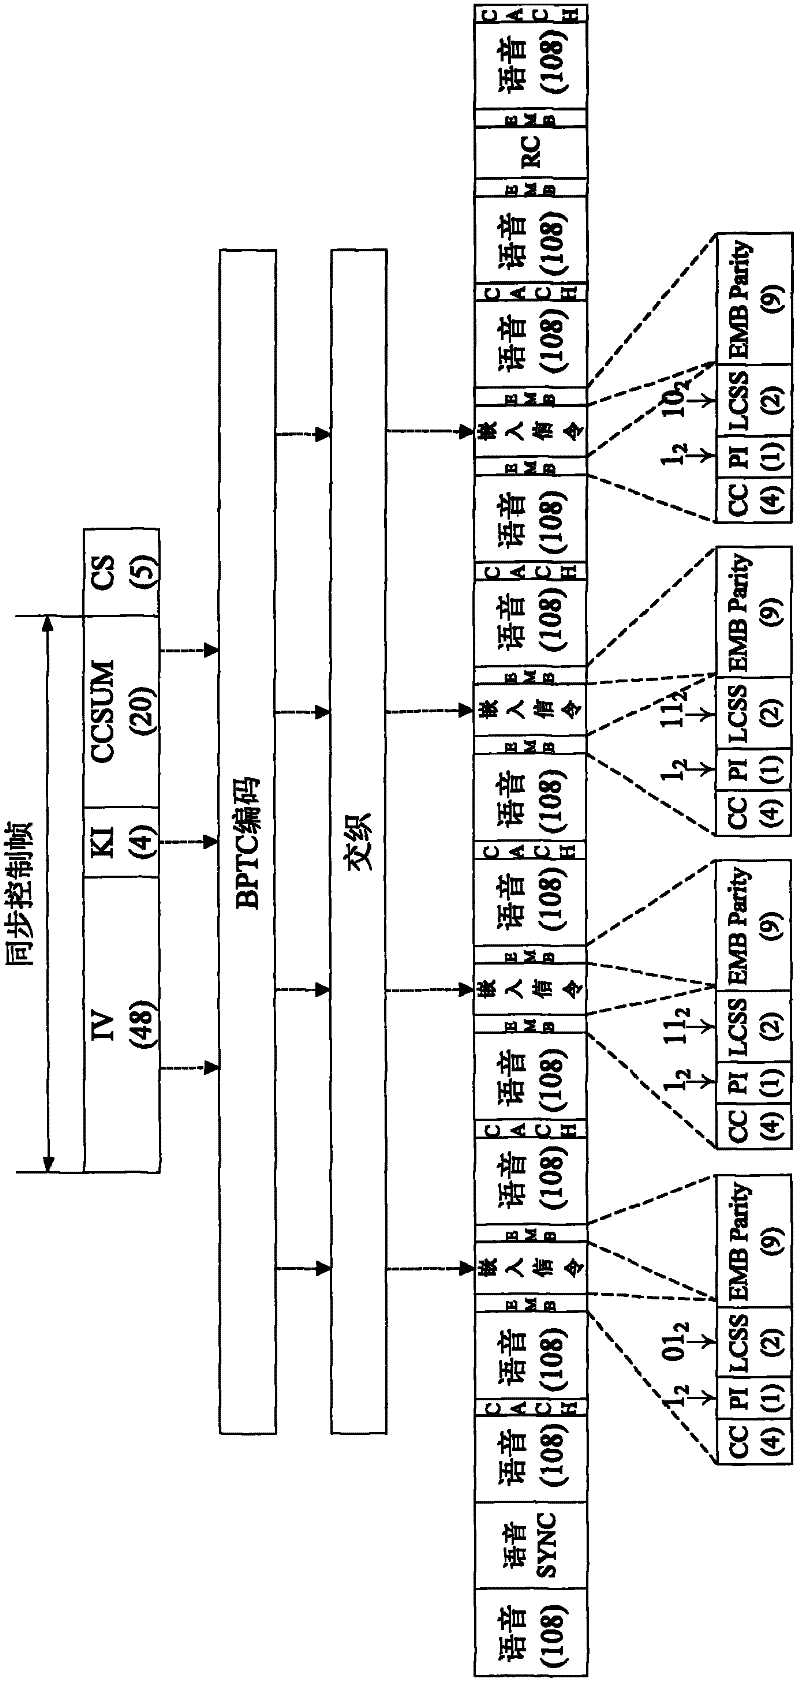 End-to-end speech encryption method for low-speed narrowband wireless digital communication